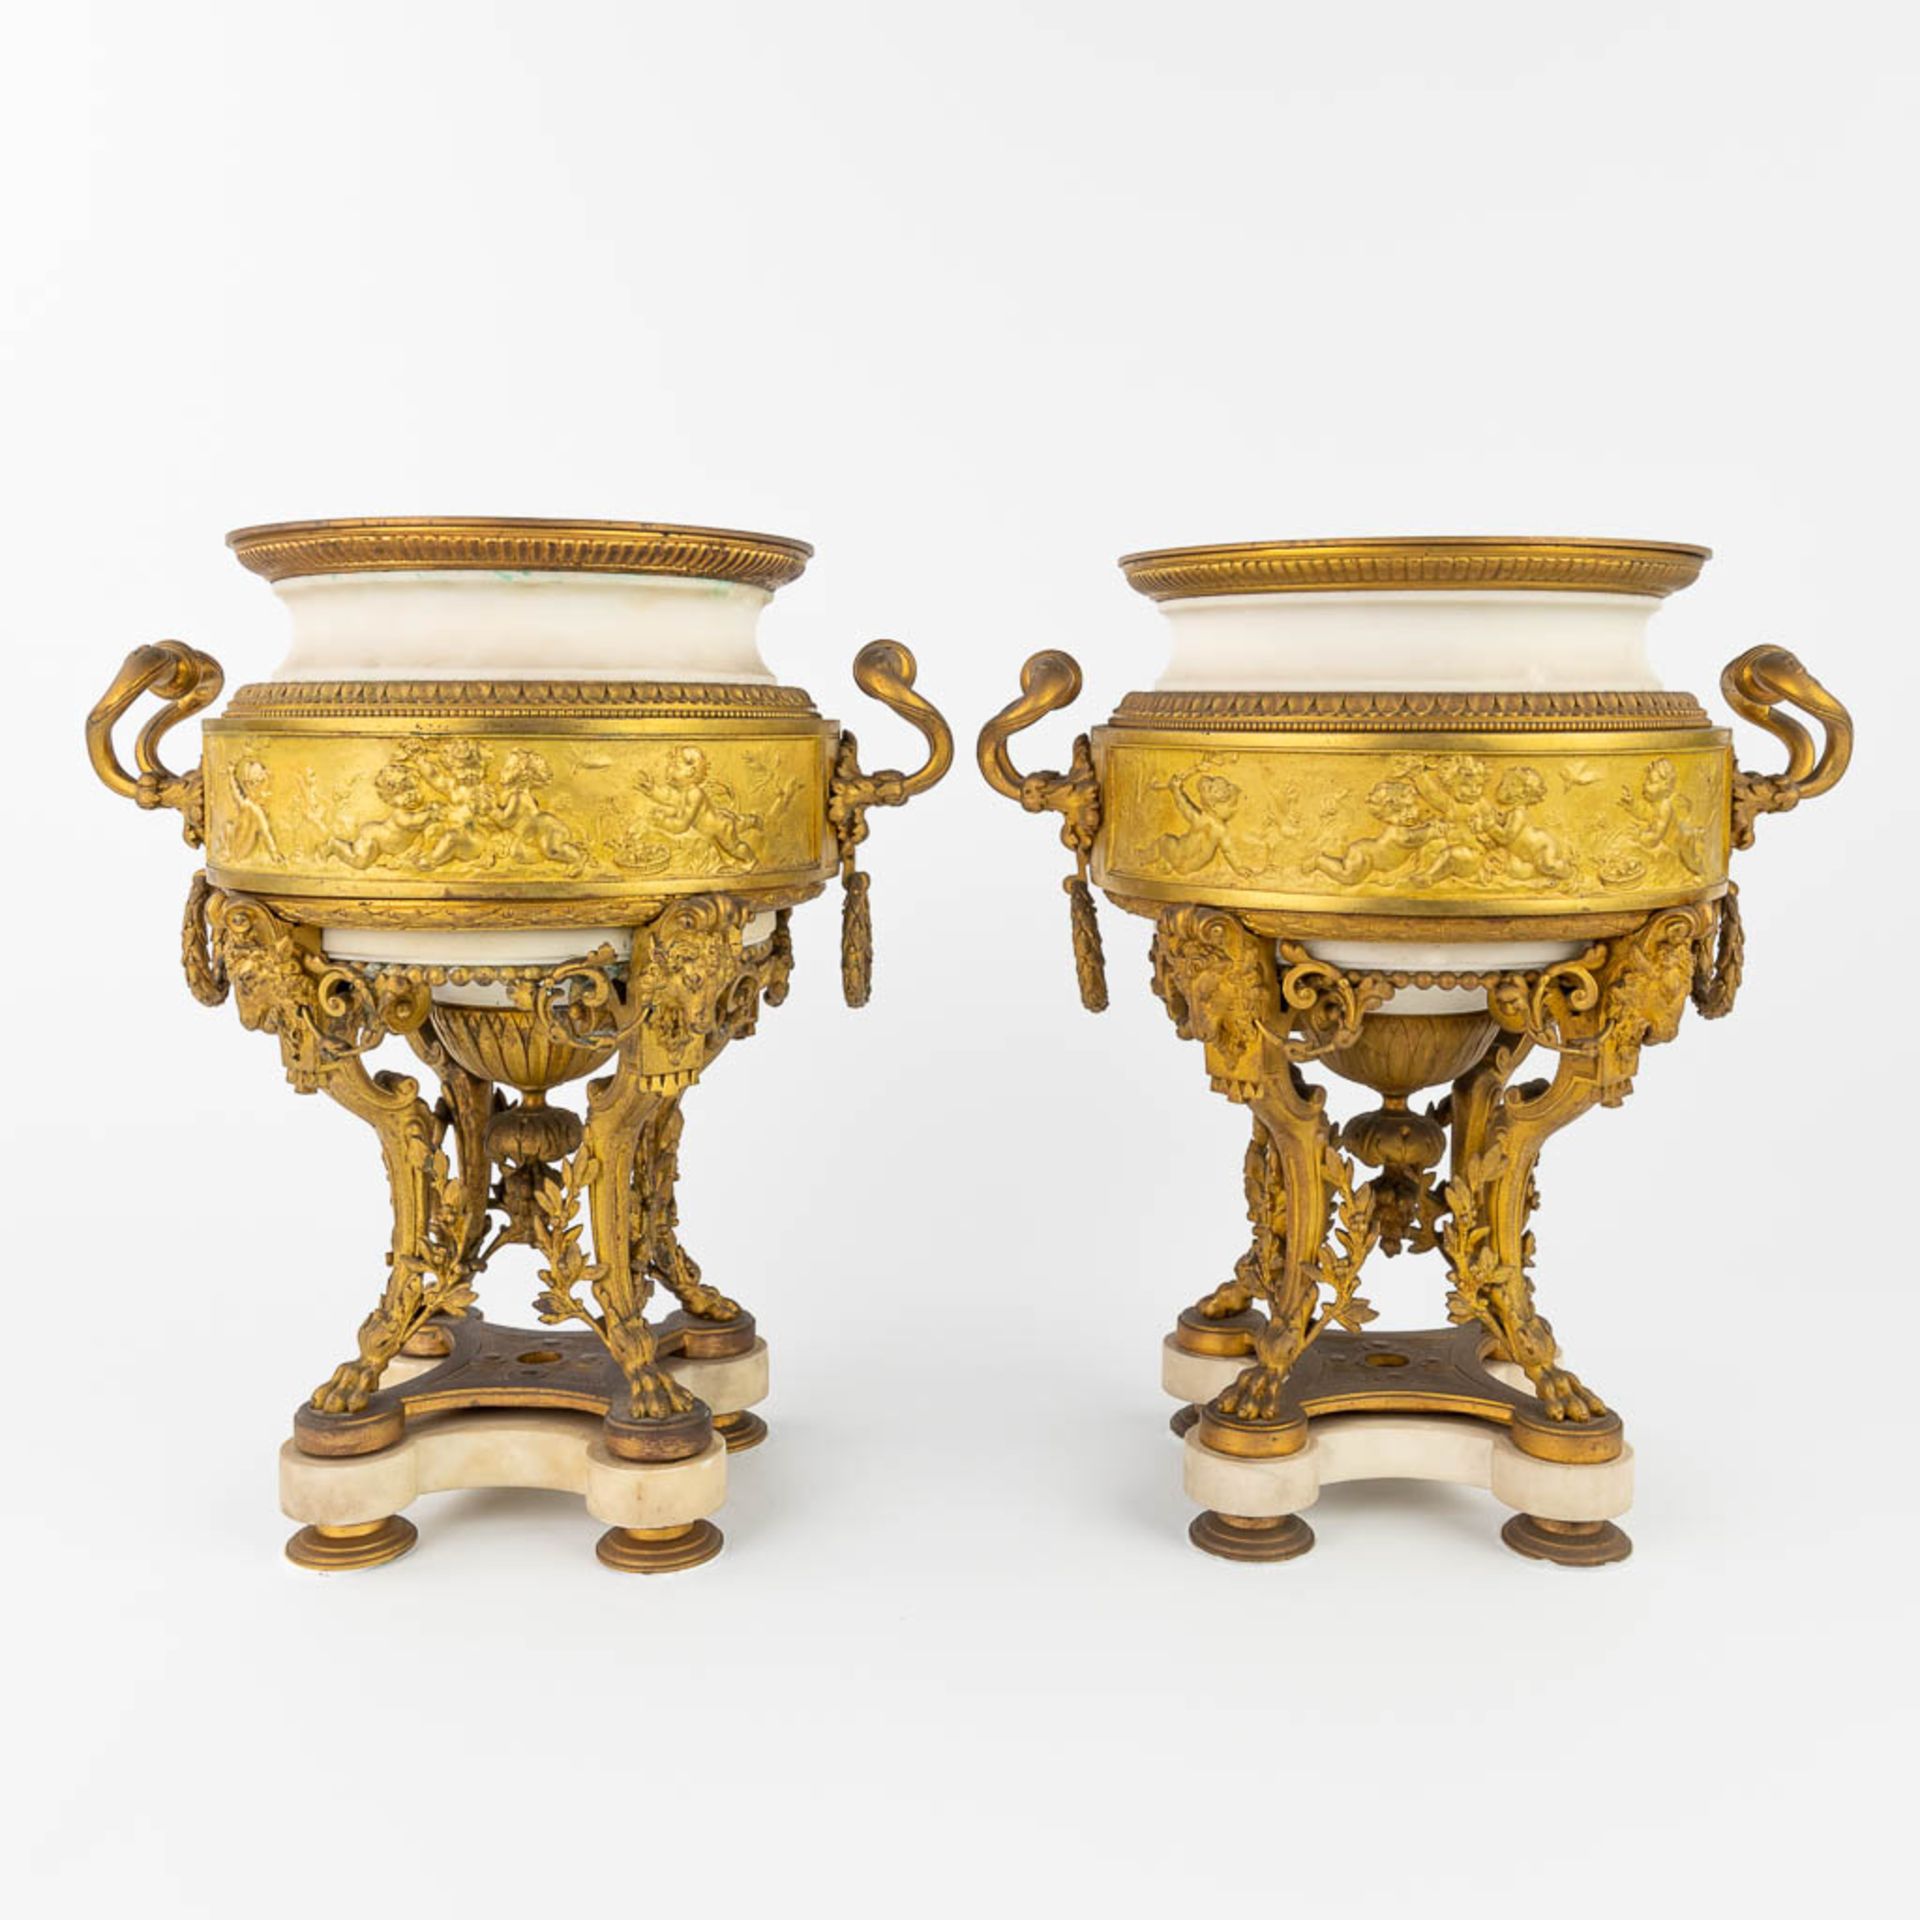 A pair of urns, made of gilt bronze and white Carrara marble in Louis XVI style. France, 19th C. (H: